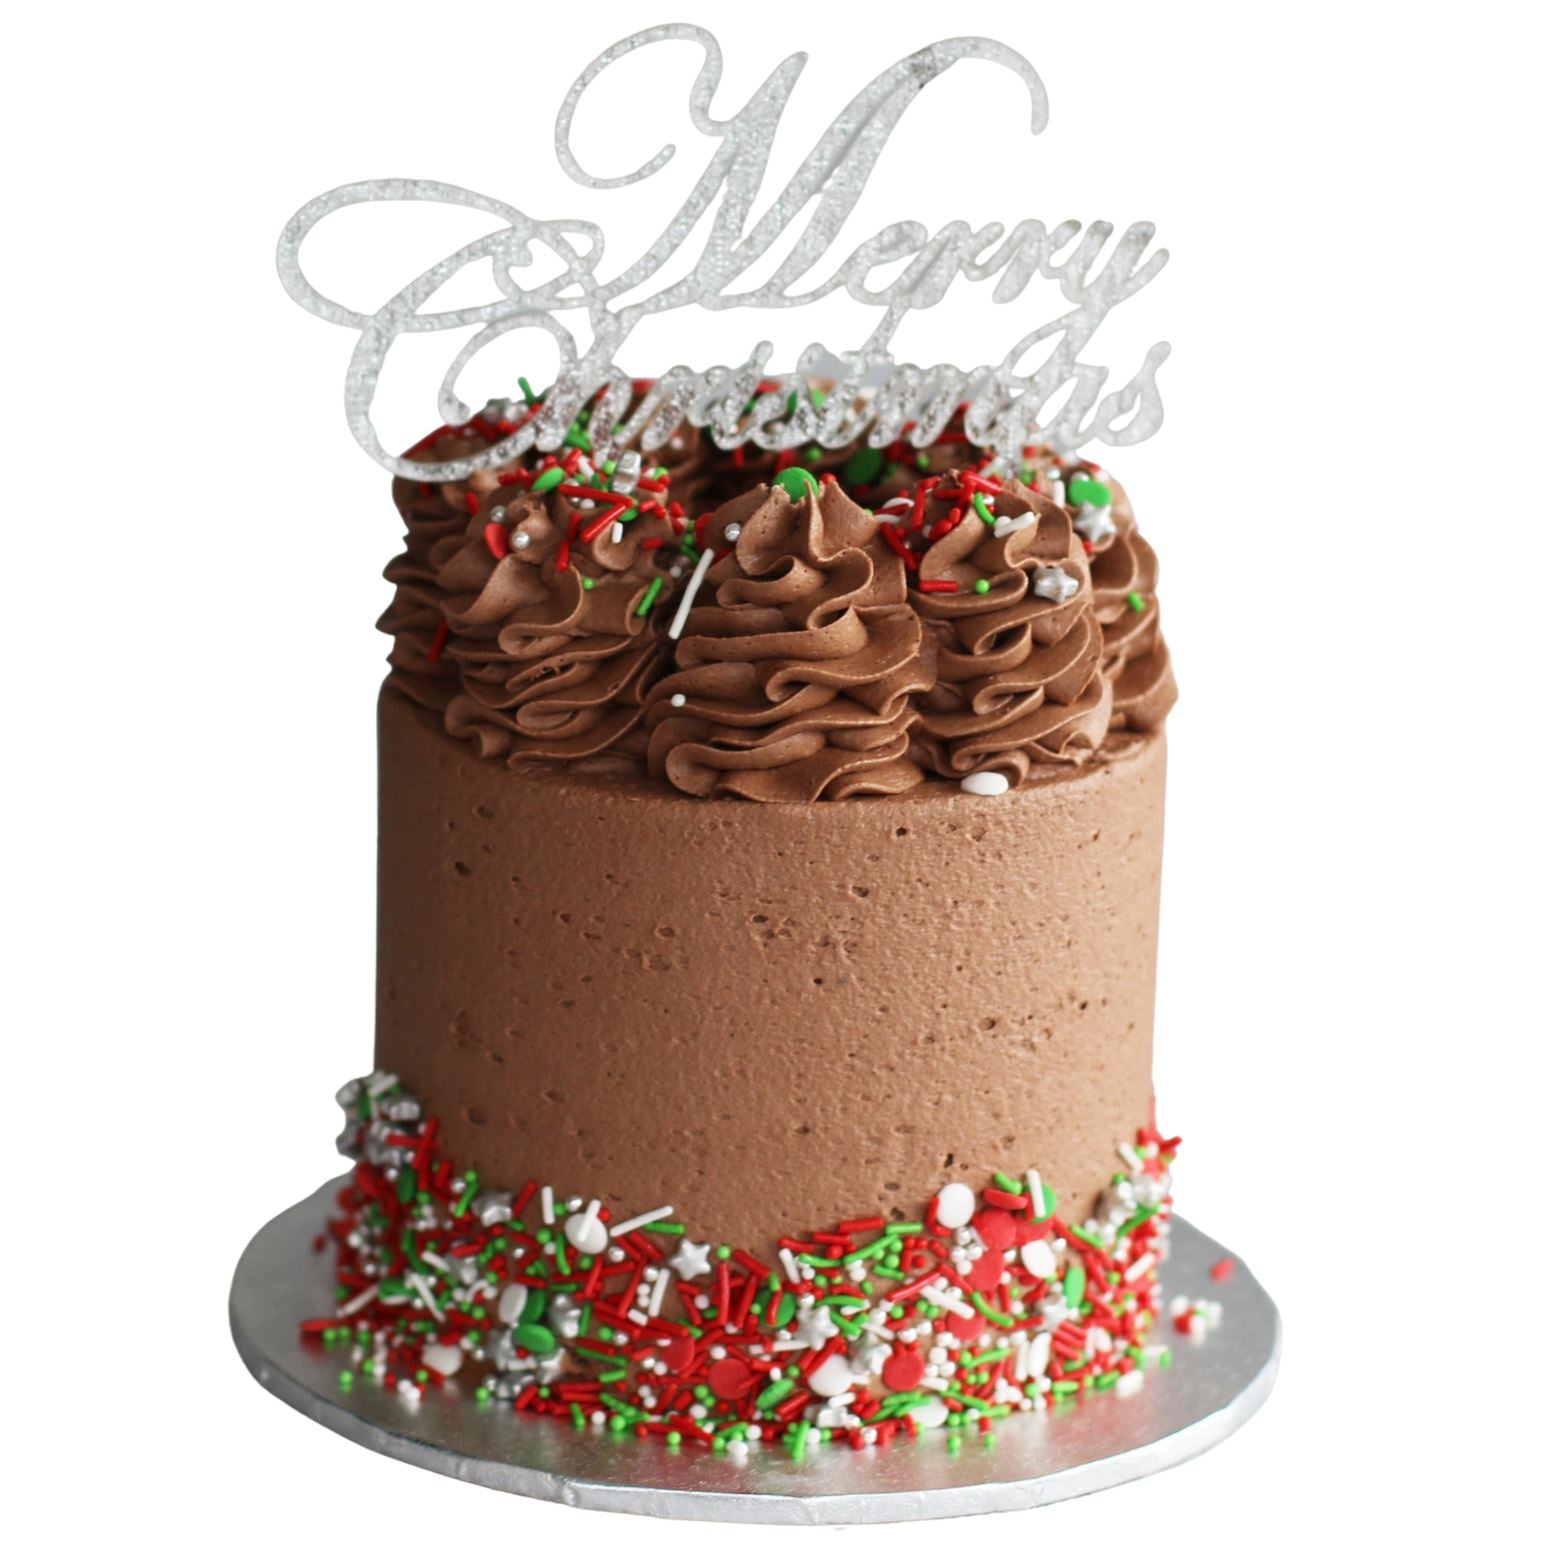 Christmas Vegan Friendly Chocolate Cake 5 Inch Cakes The Cupcake Queens 